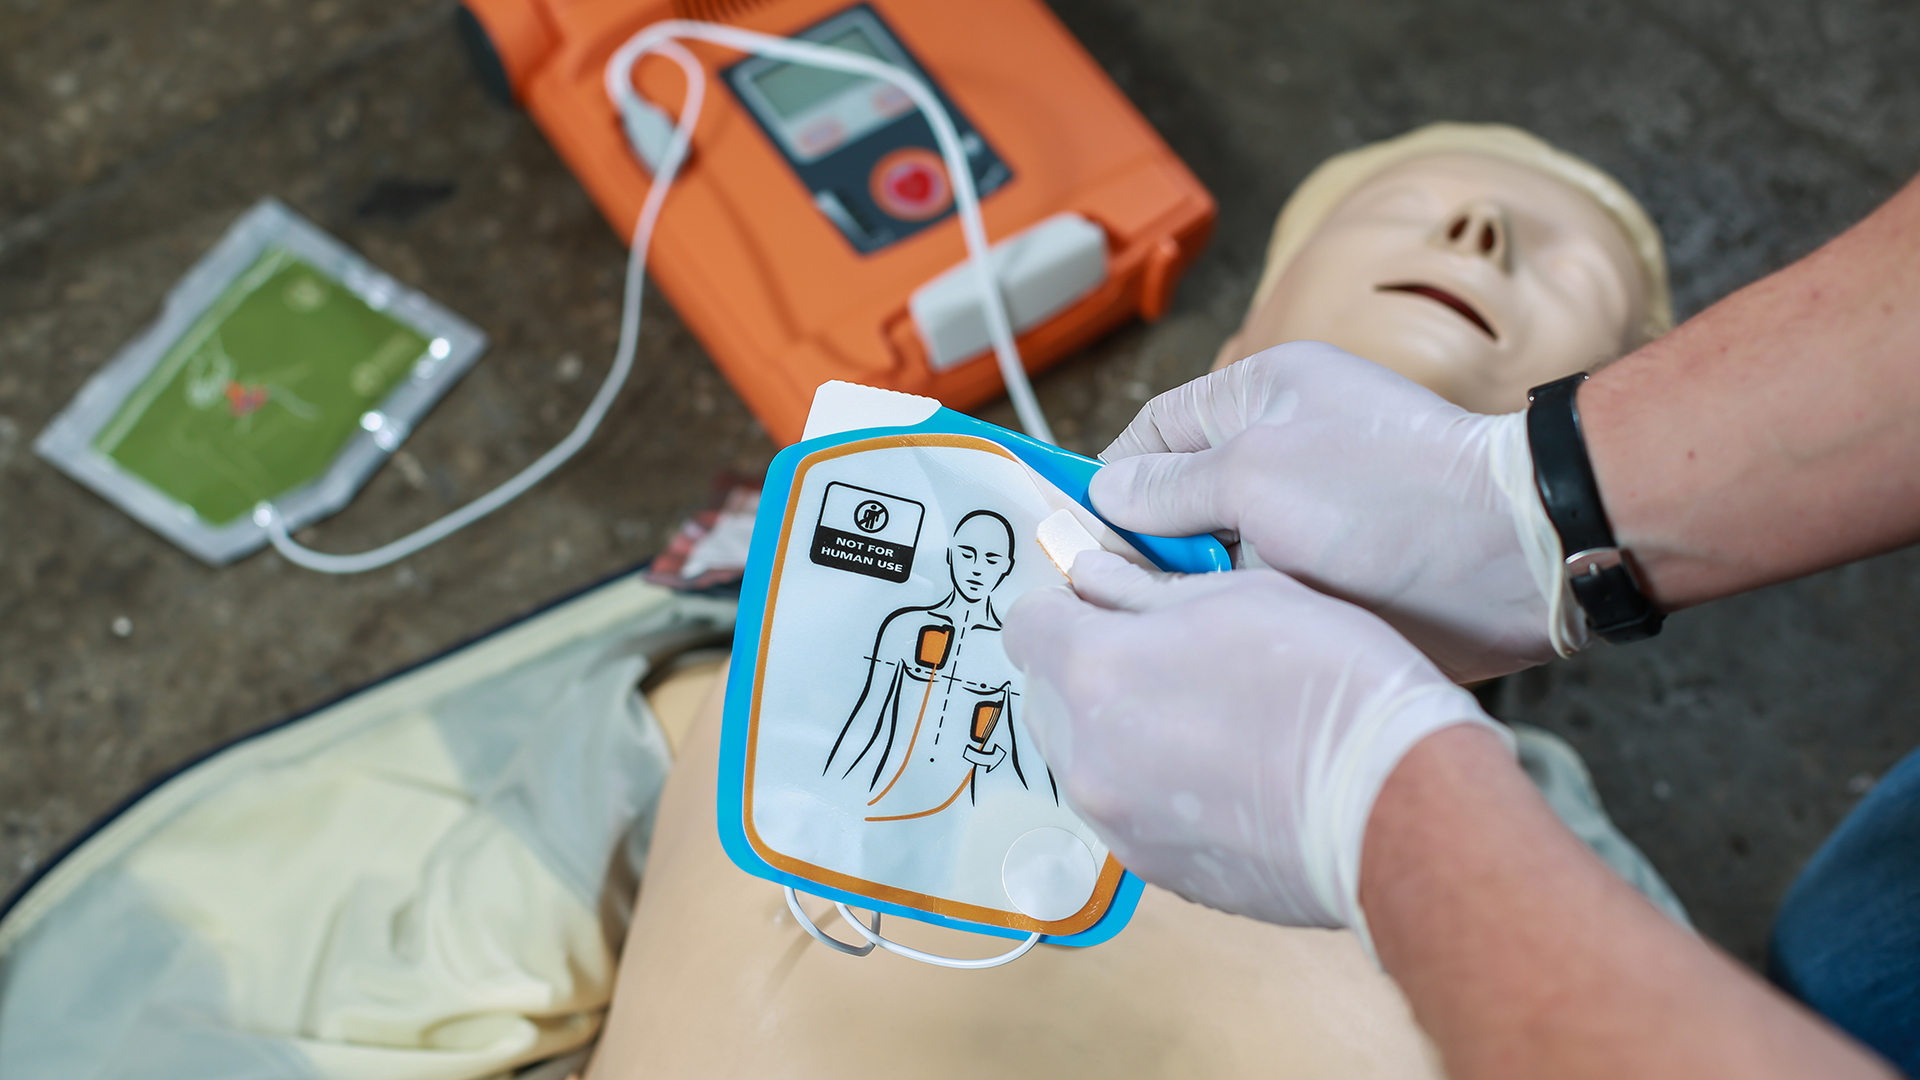 The defibrillator is easy to use and is specially designed for anyone to use, without the need to be a doctor